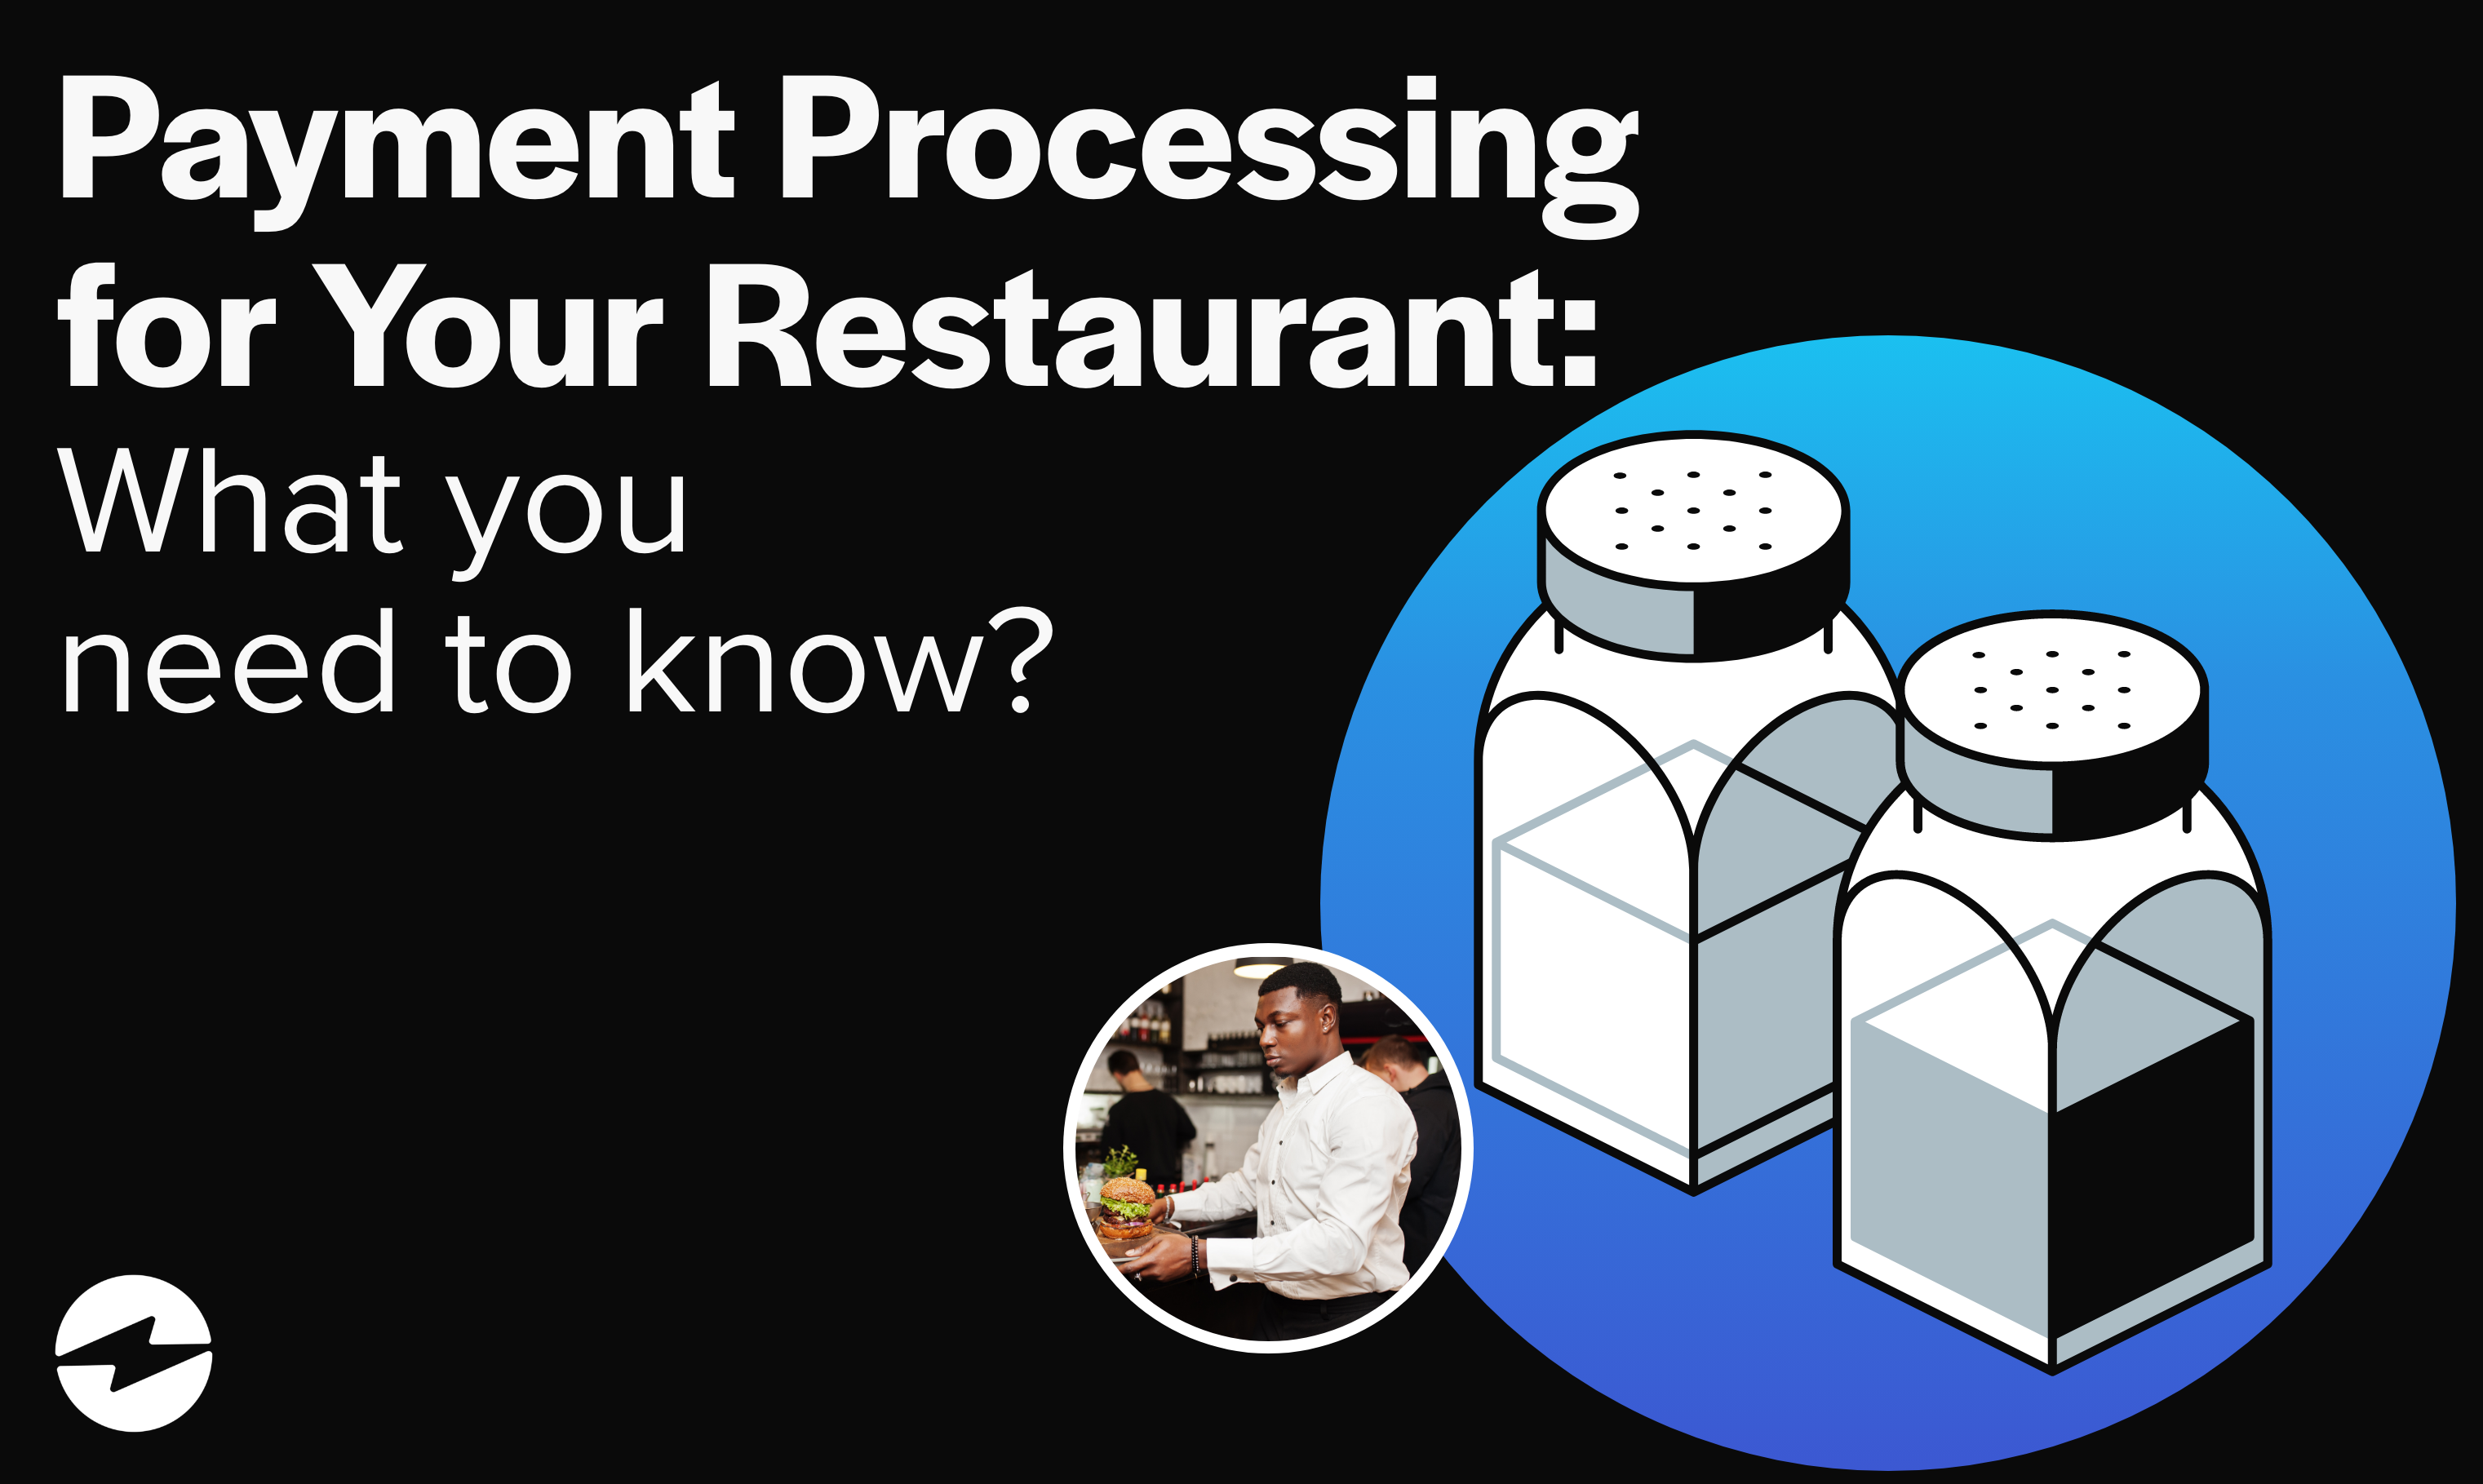 Payment Processing for Your Restaurant: what you need to know